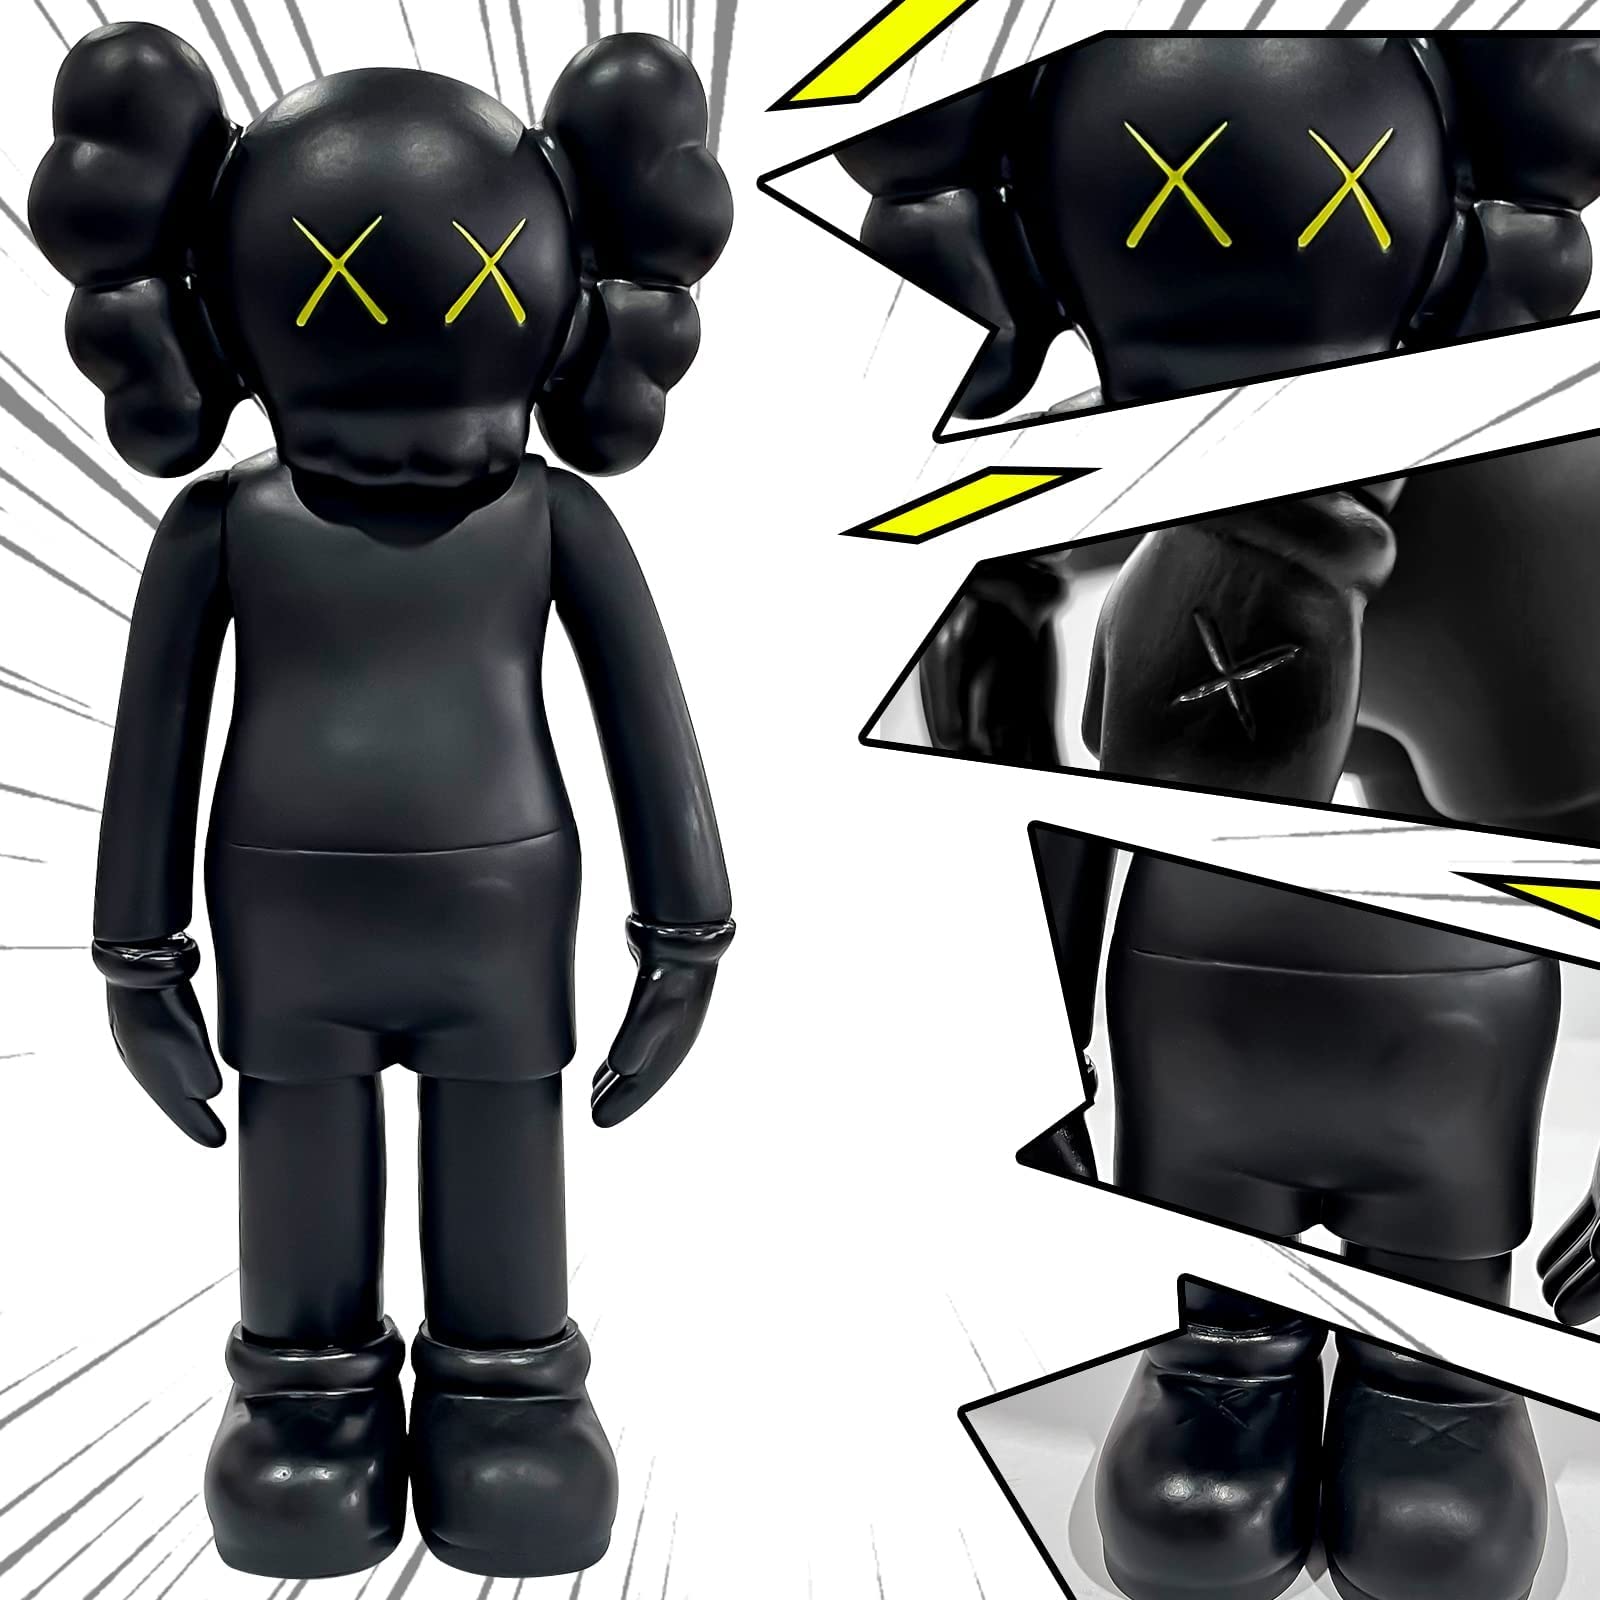 MECIKR 8 Inch KAWS Figure Model Art Action Figure, for Birthday Party Gifts,Christmas, Halloween, Life Decoration ,for Children and Adults